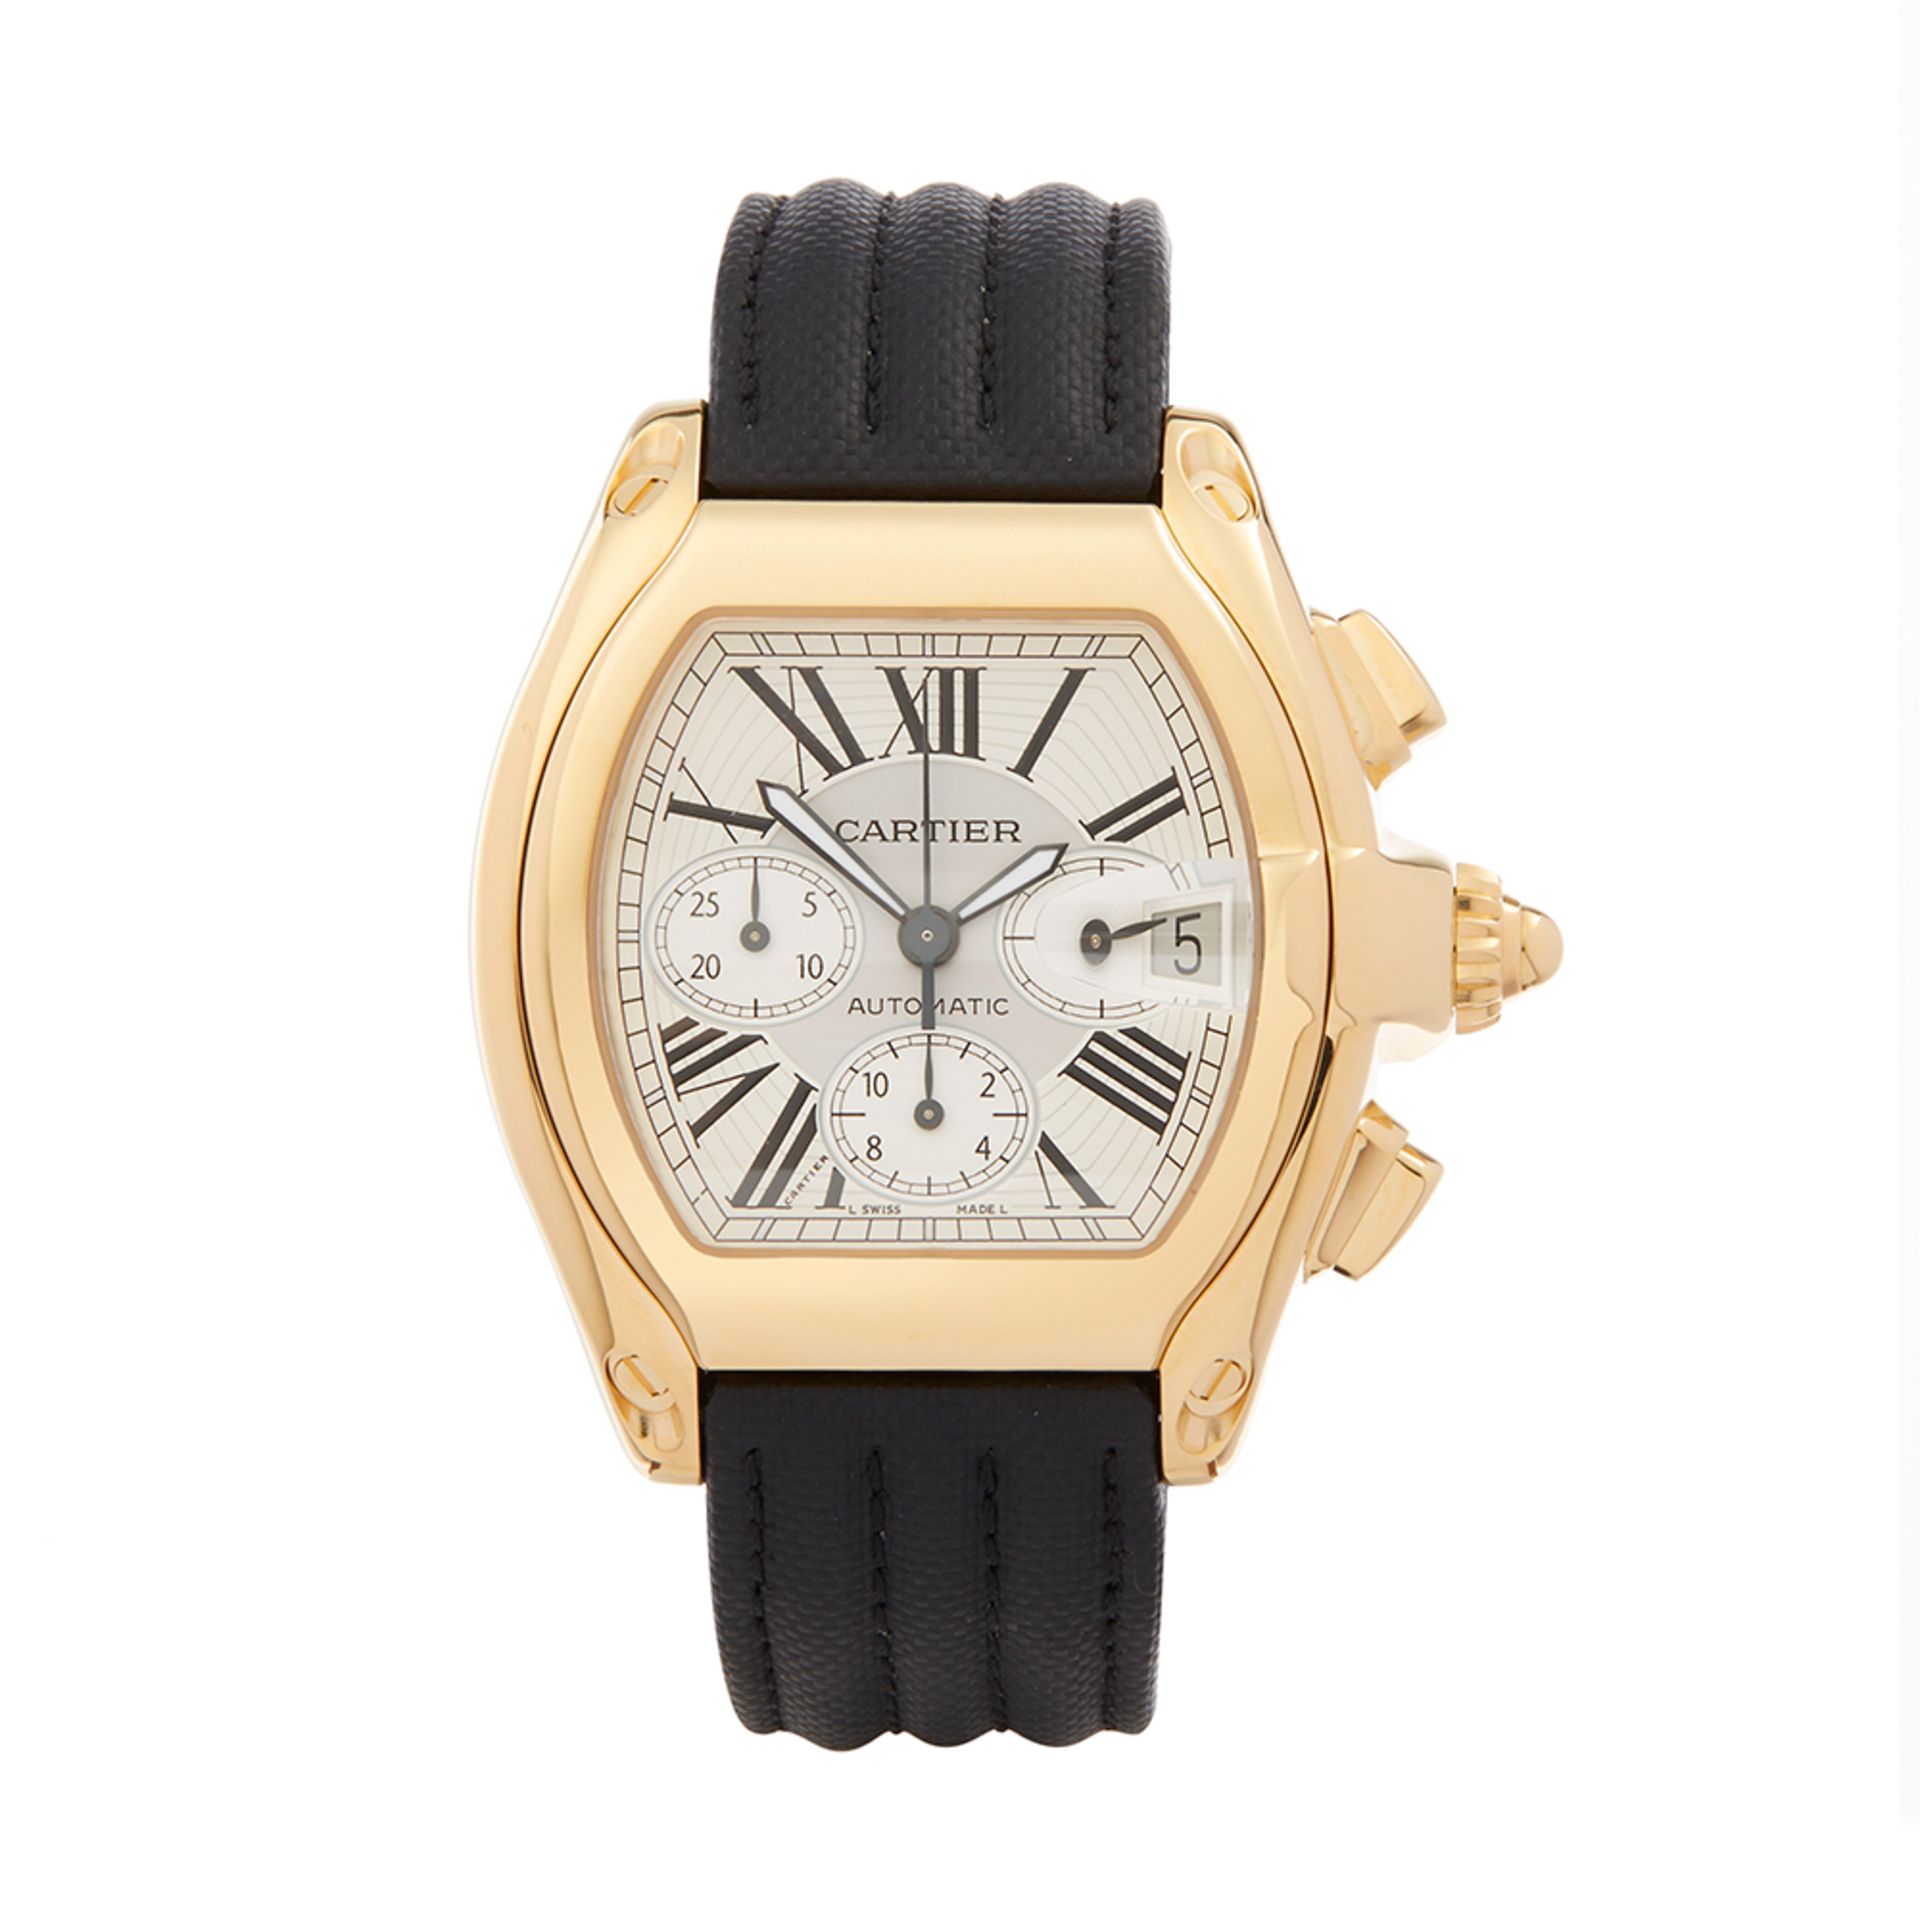 Cartier Roadster XL 18K Yellow Gold - W62021Y3 - Image 2 of 8